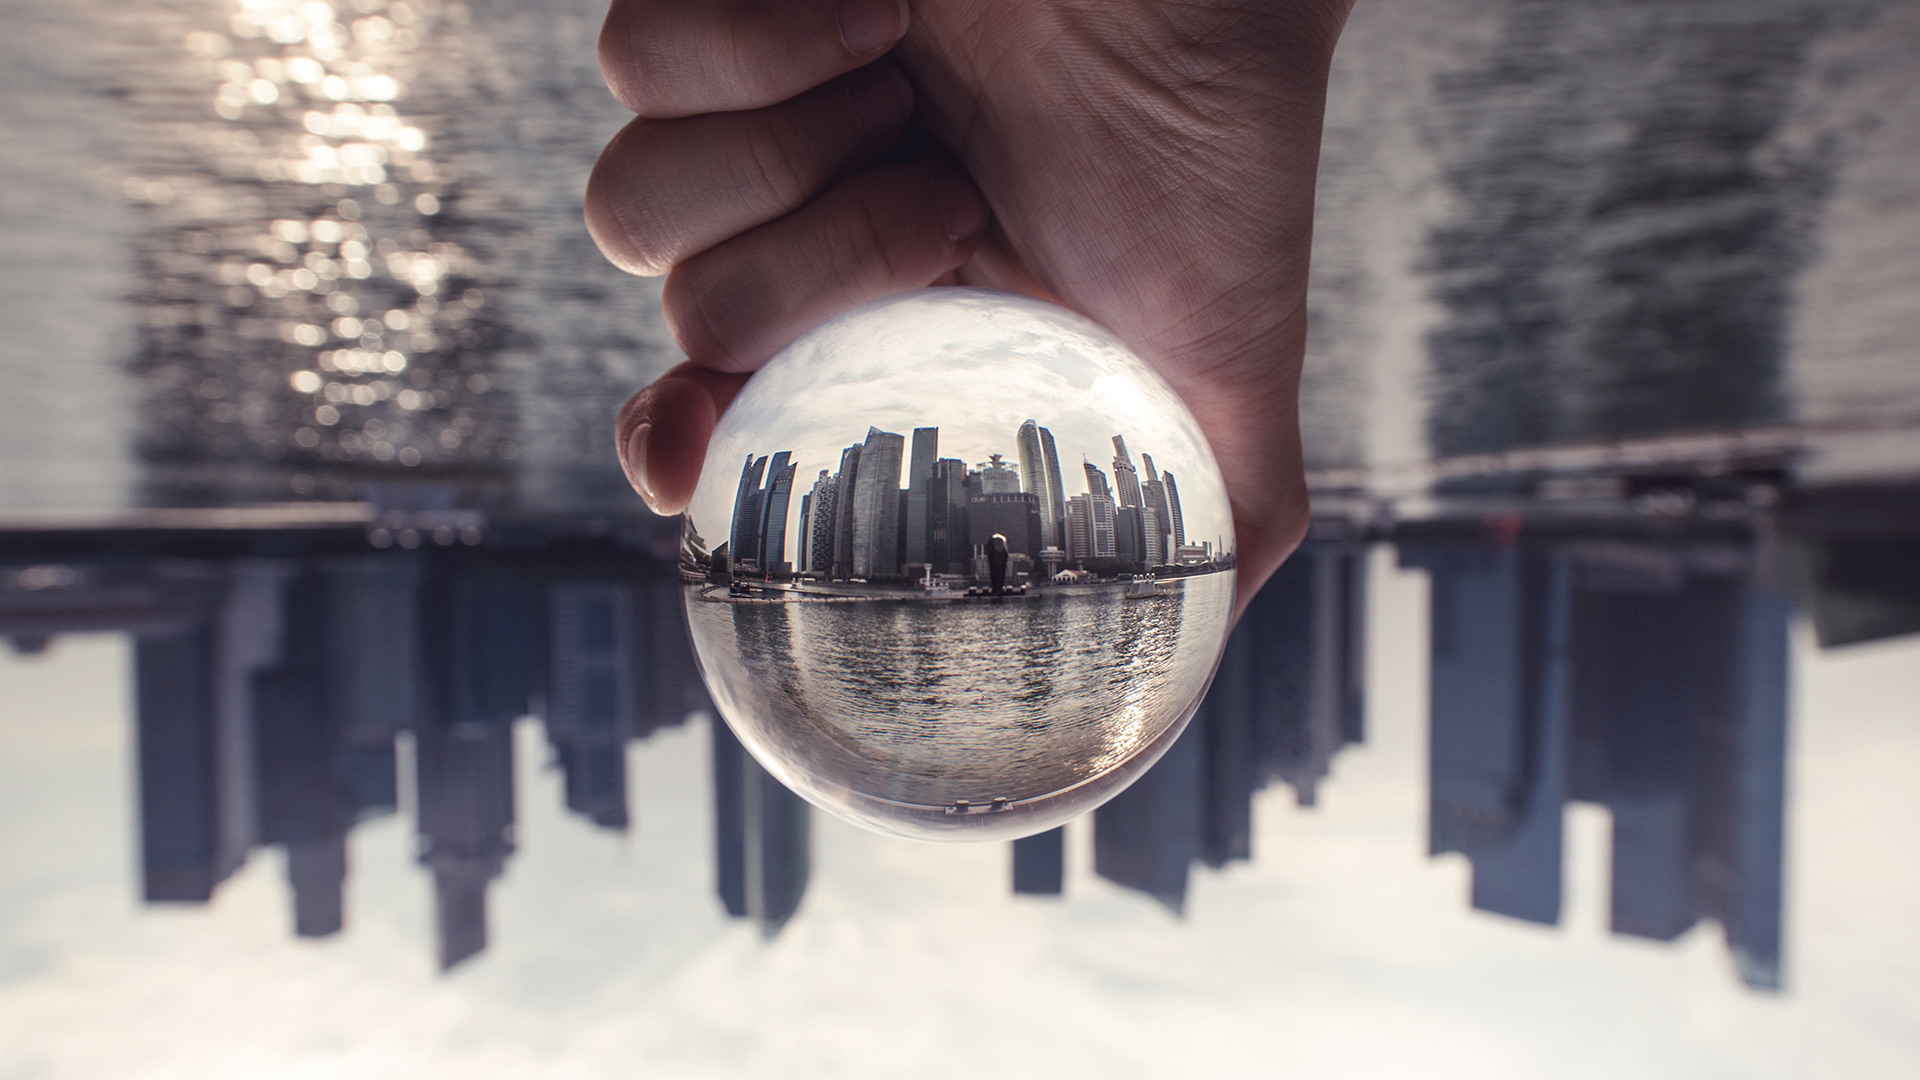 Heres how to get that creative crystal ball effect in your photography